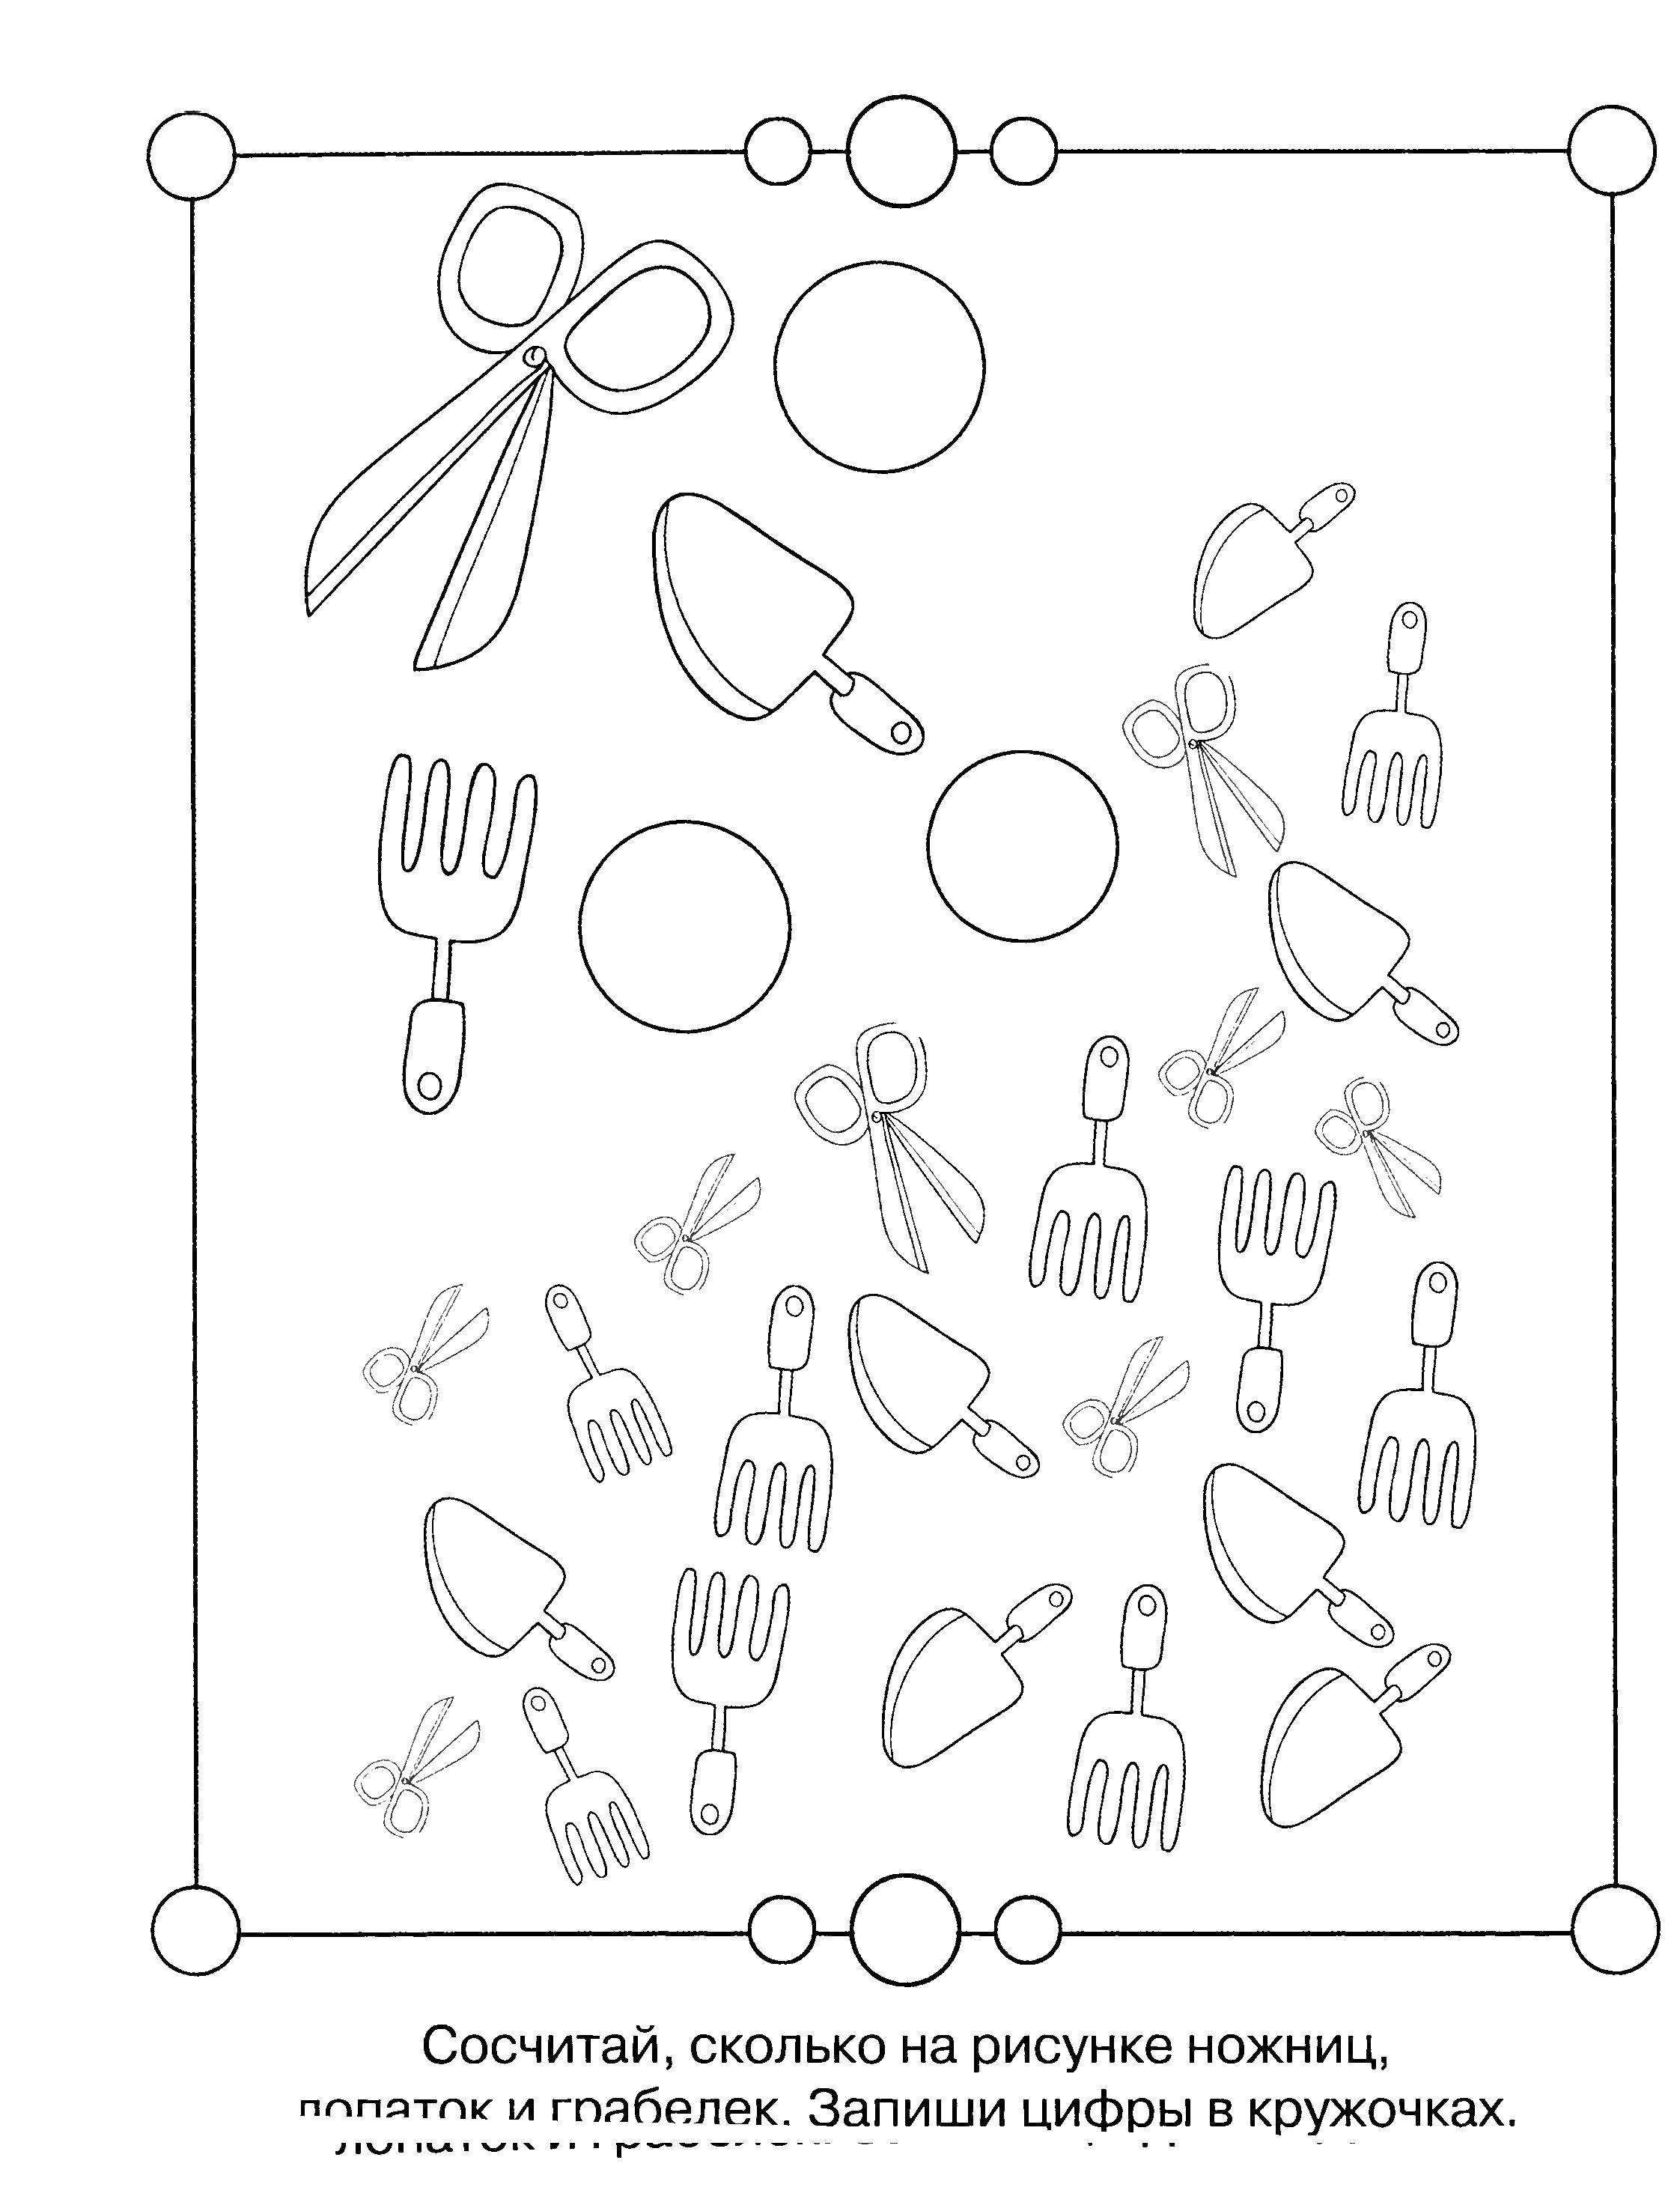 Coloring How many scissors?. Category riddles for kids. Tags:  Teaching coloring, logic.